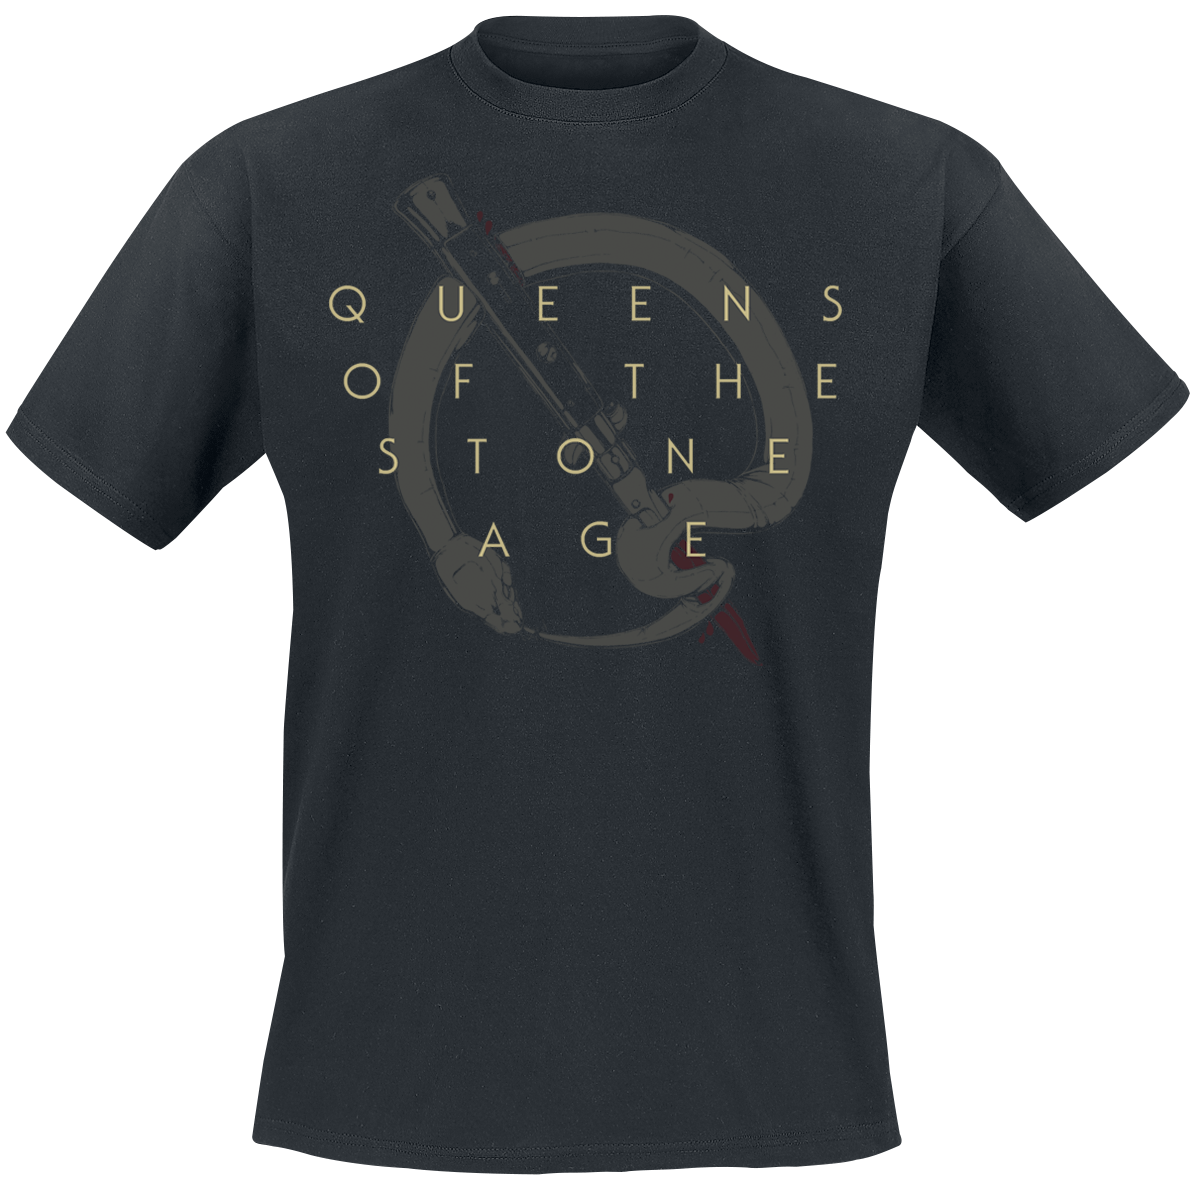 Queens Of The Stone Age - In Times New Roman - Bad Dog - T-Shirt - schwarz